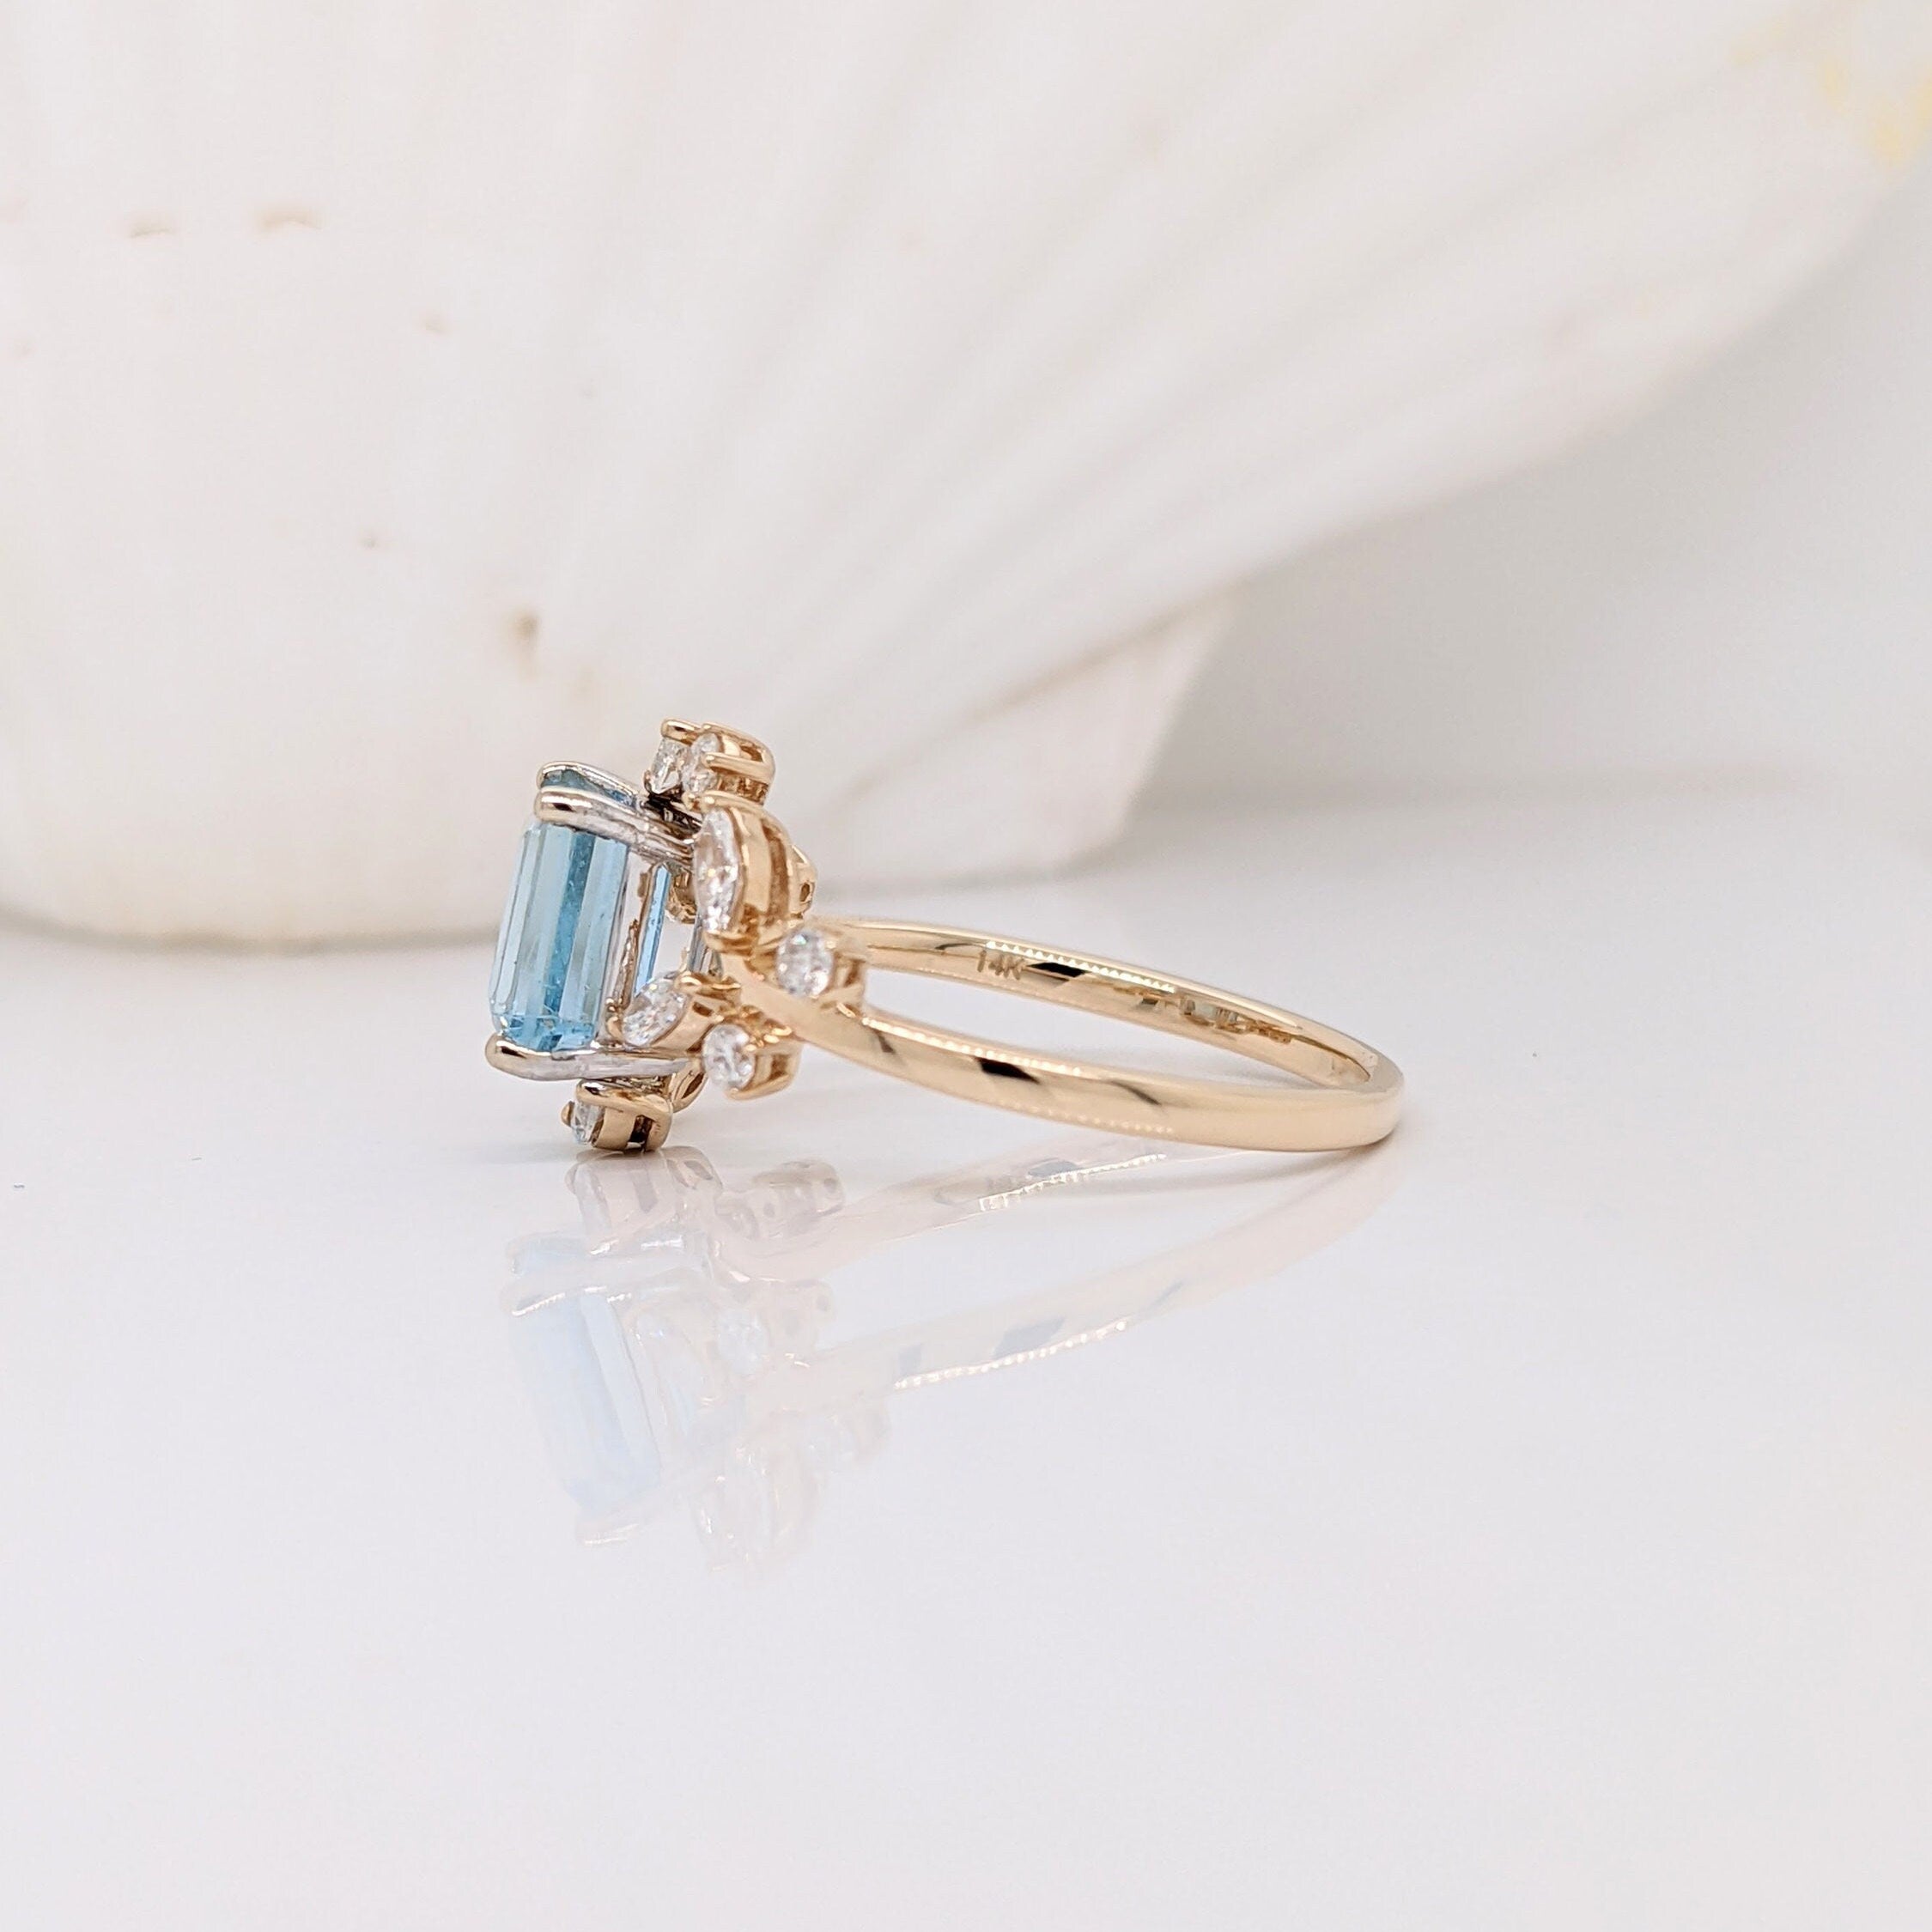 Santa Maria Aquamarine Ring in Solid 14K Yellow Gold with Natural Diamond Accents | Emerald Cut 7x5mm | March Birthstone | Engagement Ring